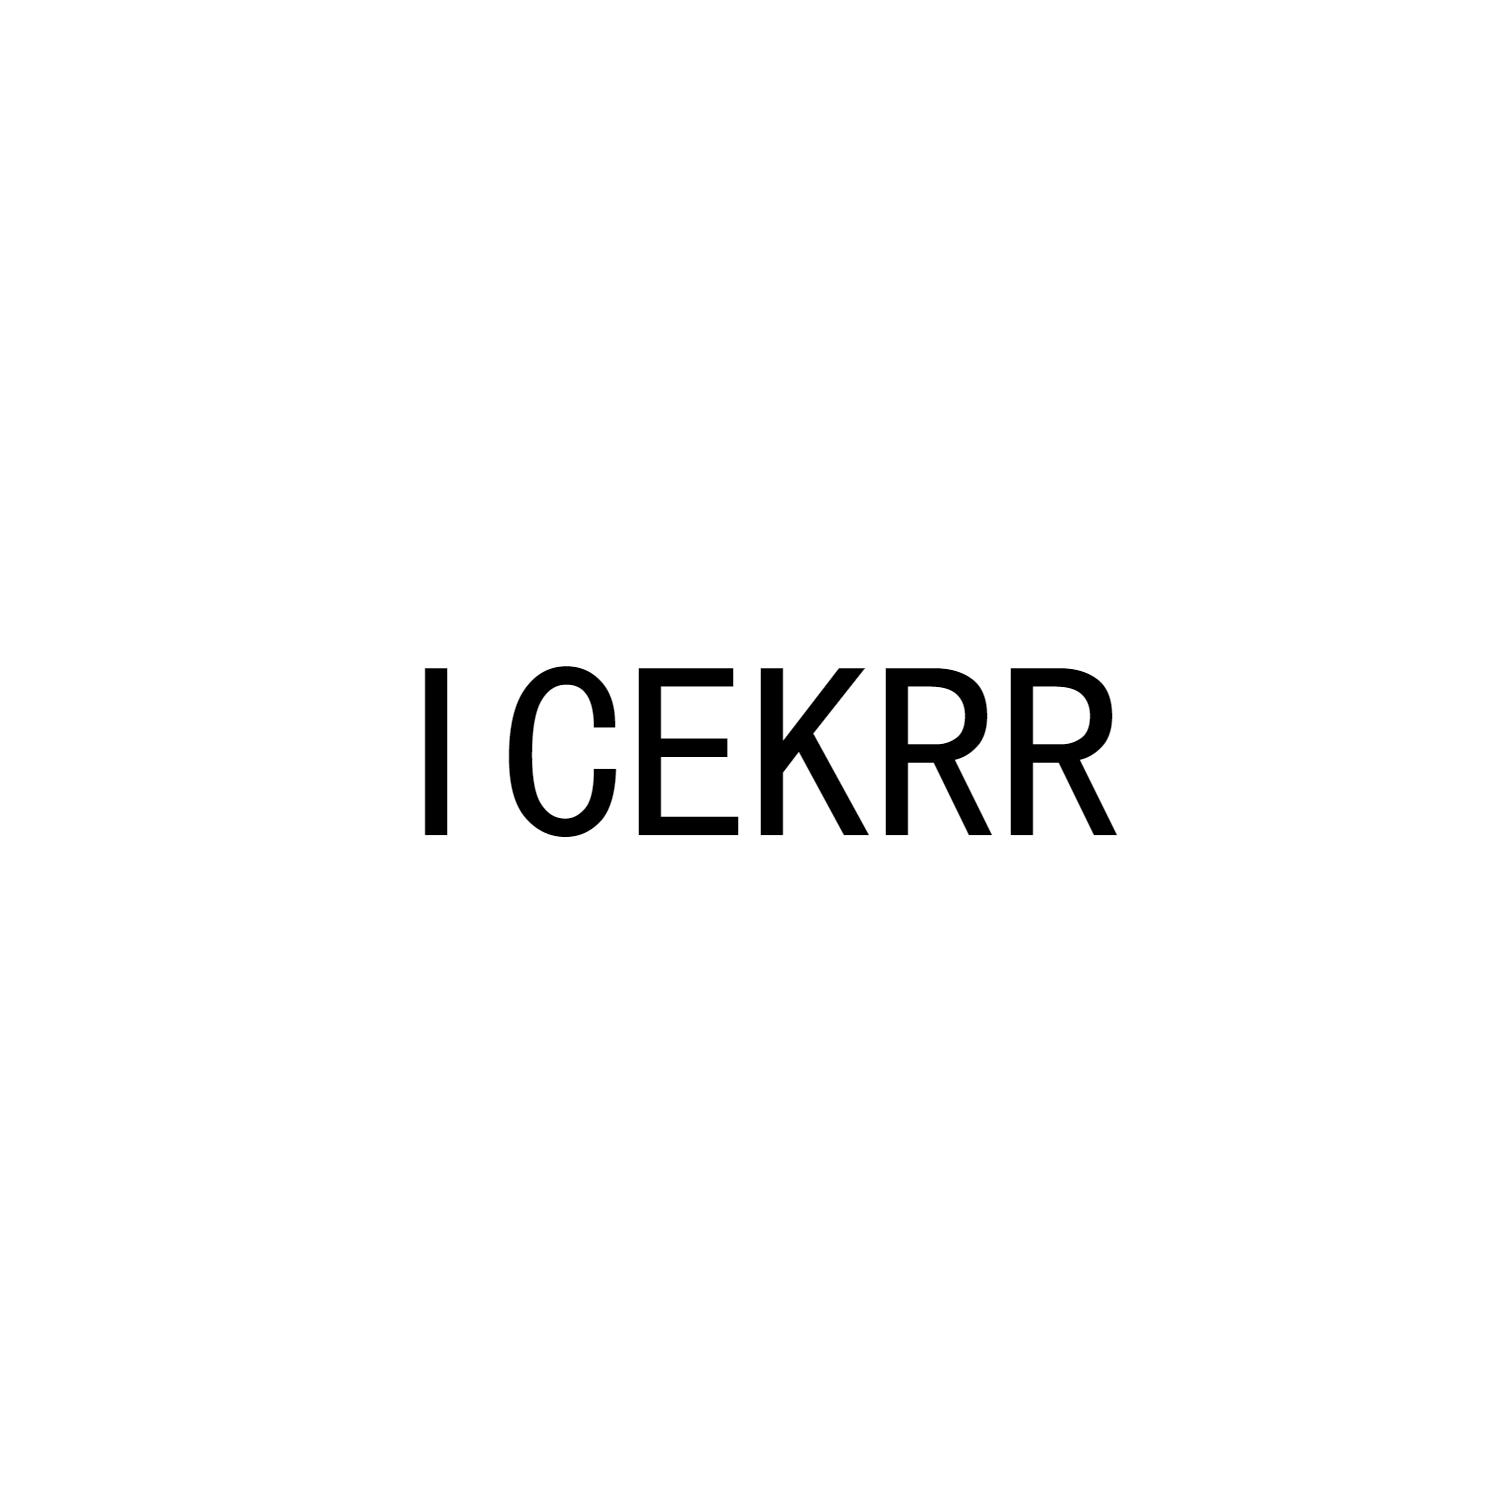 ICEKRR